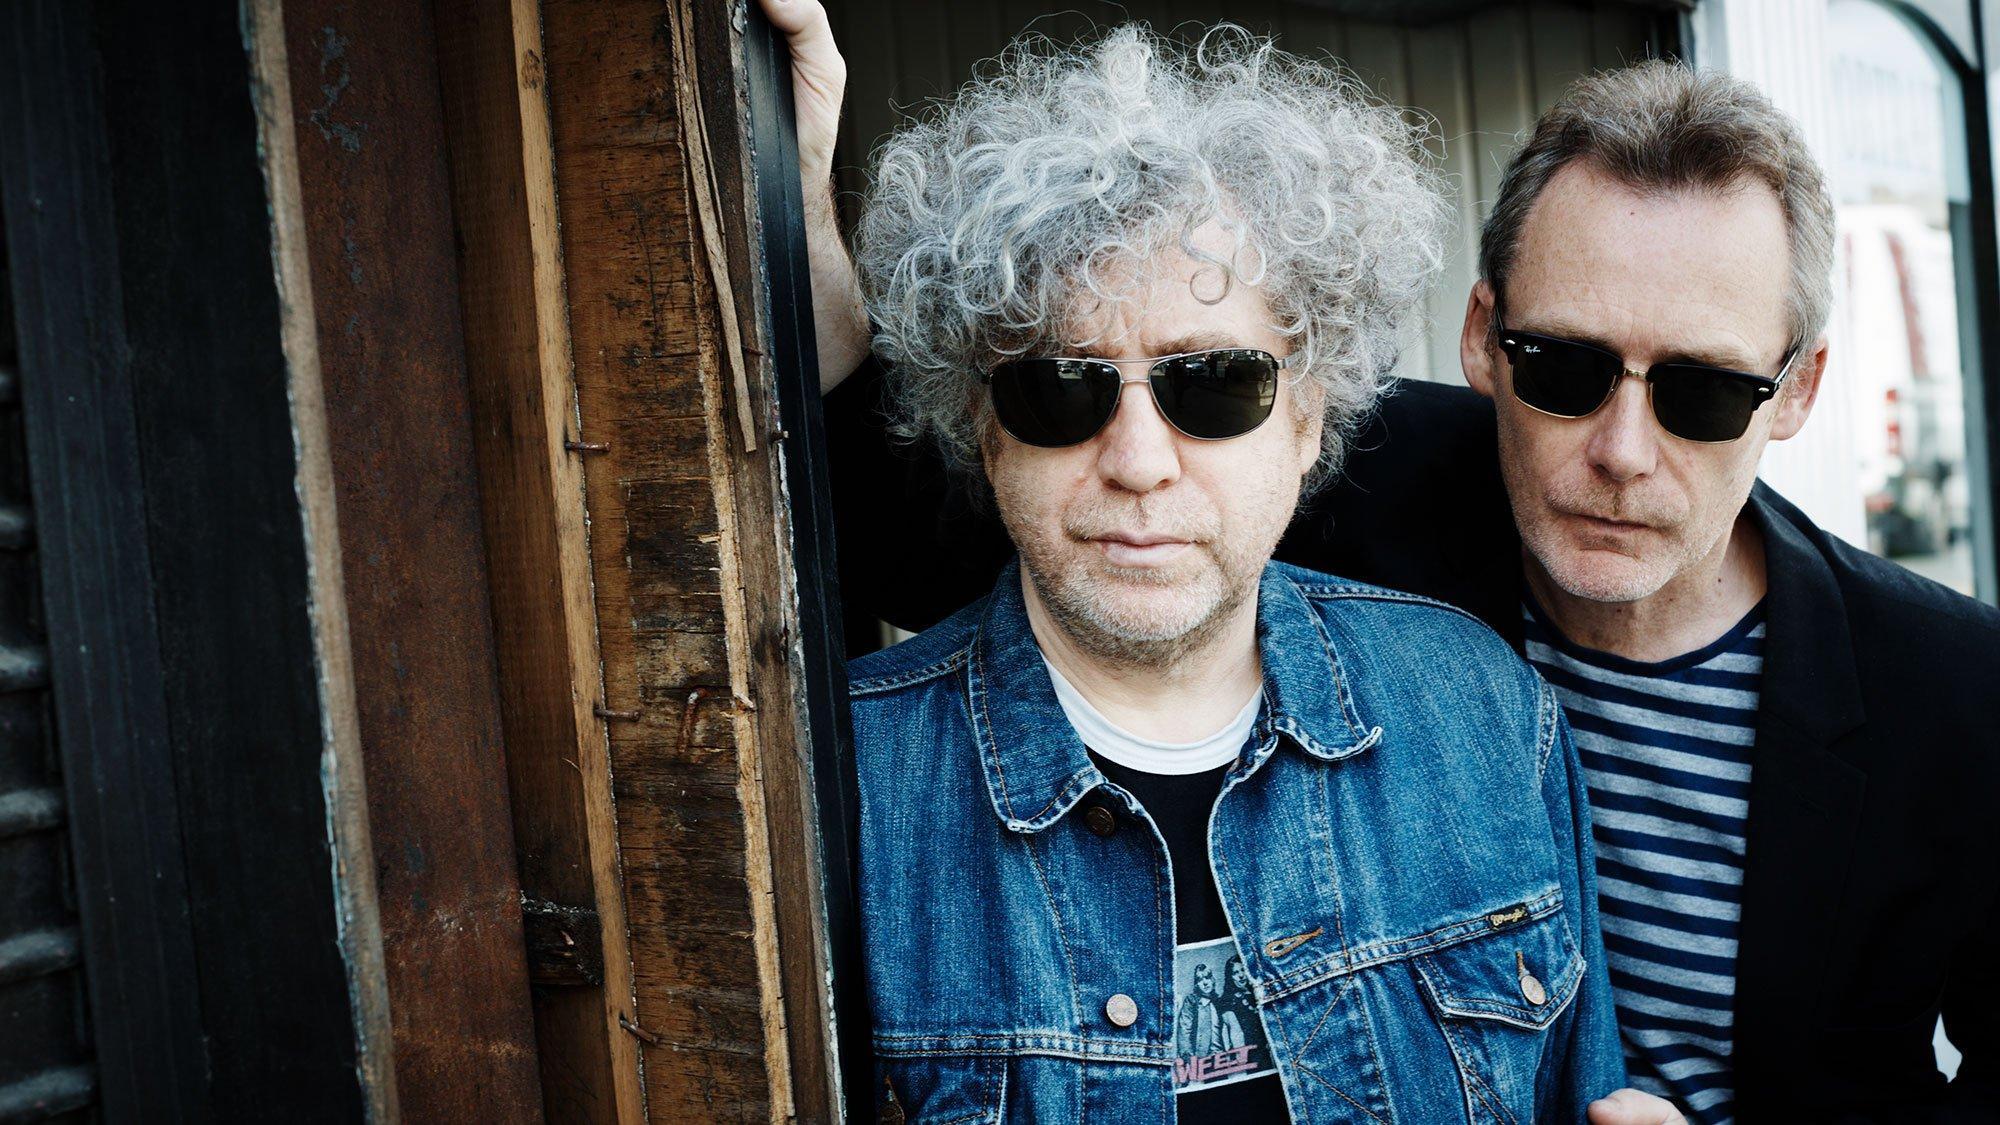 Jim Reid and William Reid of The Jesus and Mary Chain.